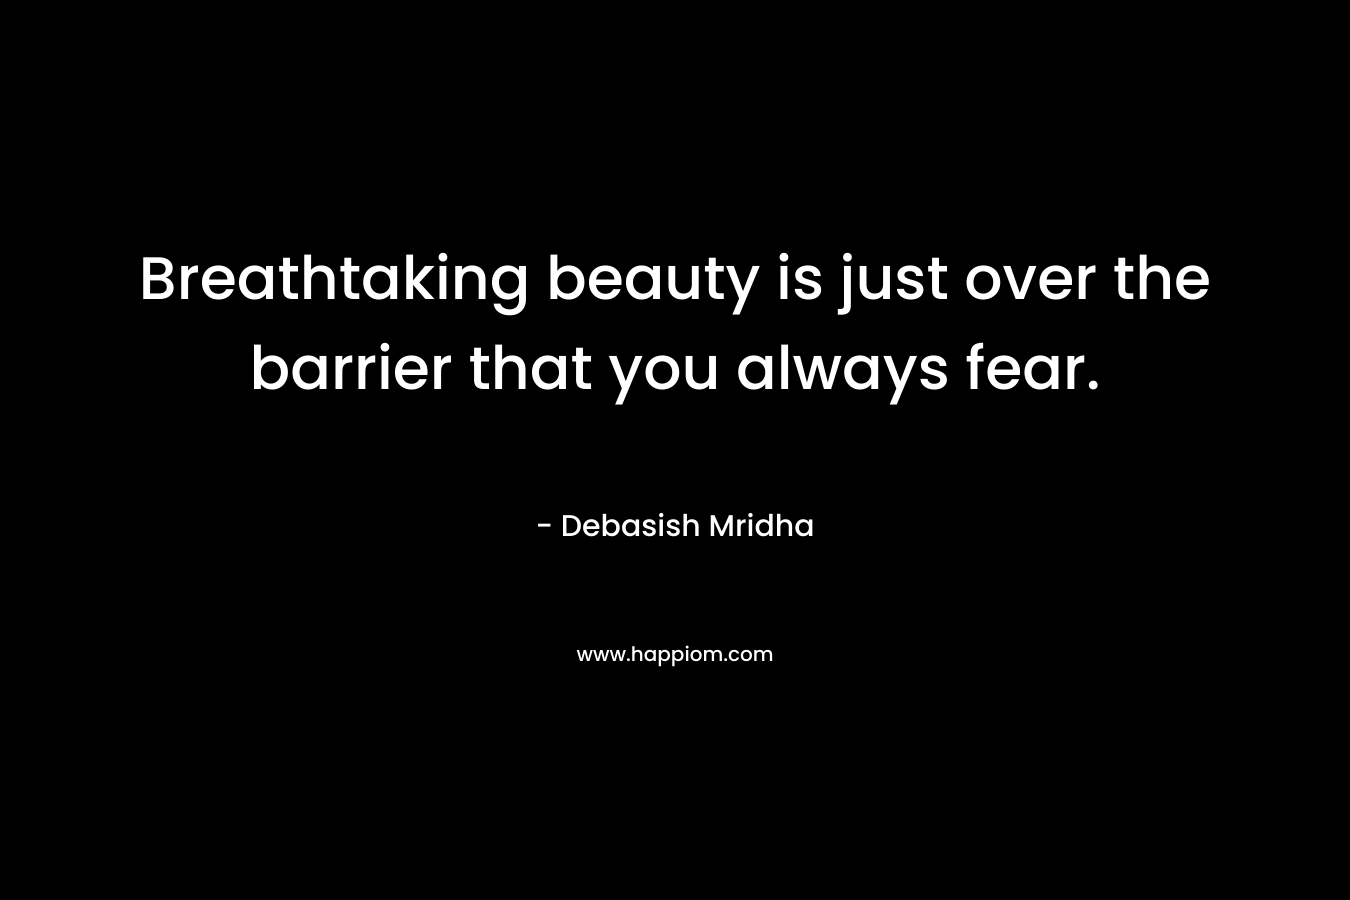 Breathtaking beauty is just over the barrier that you always fear.